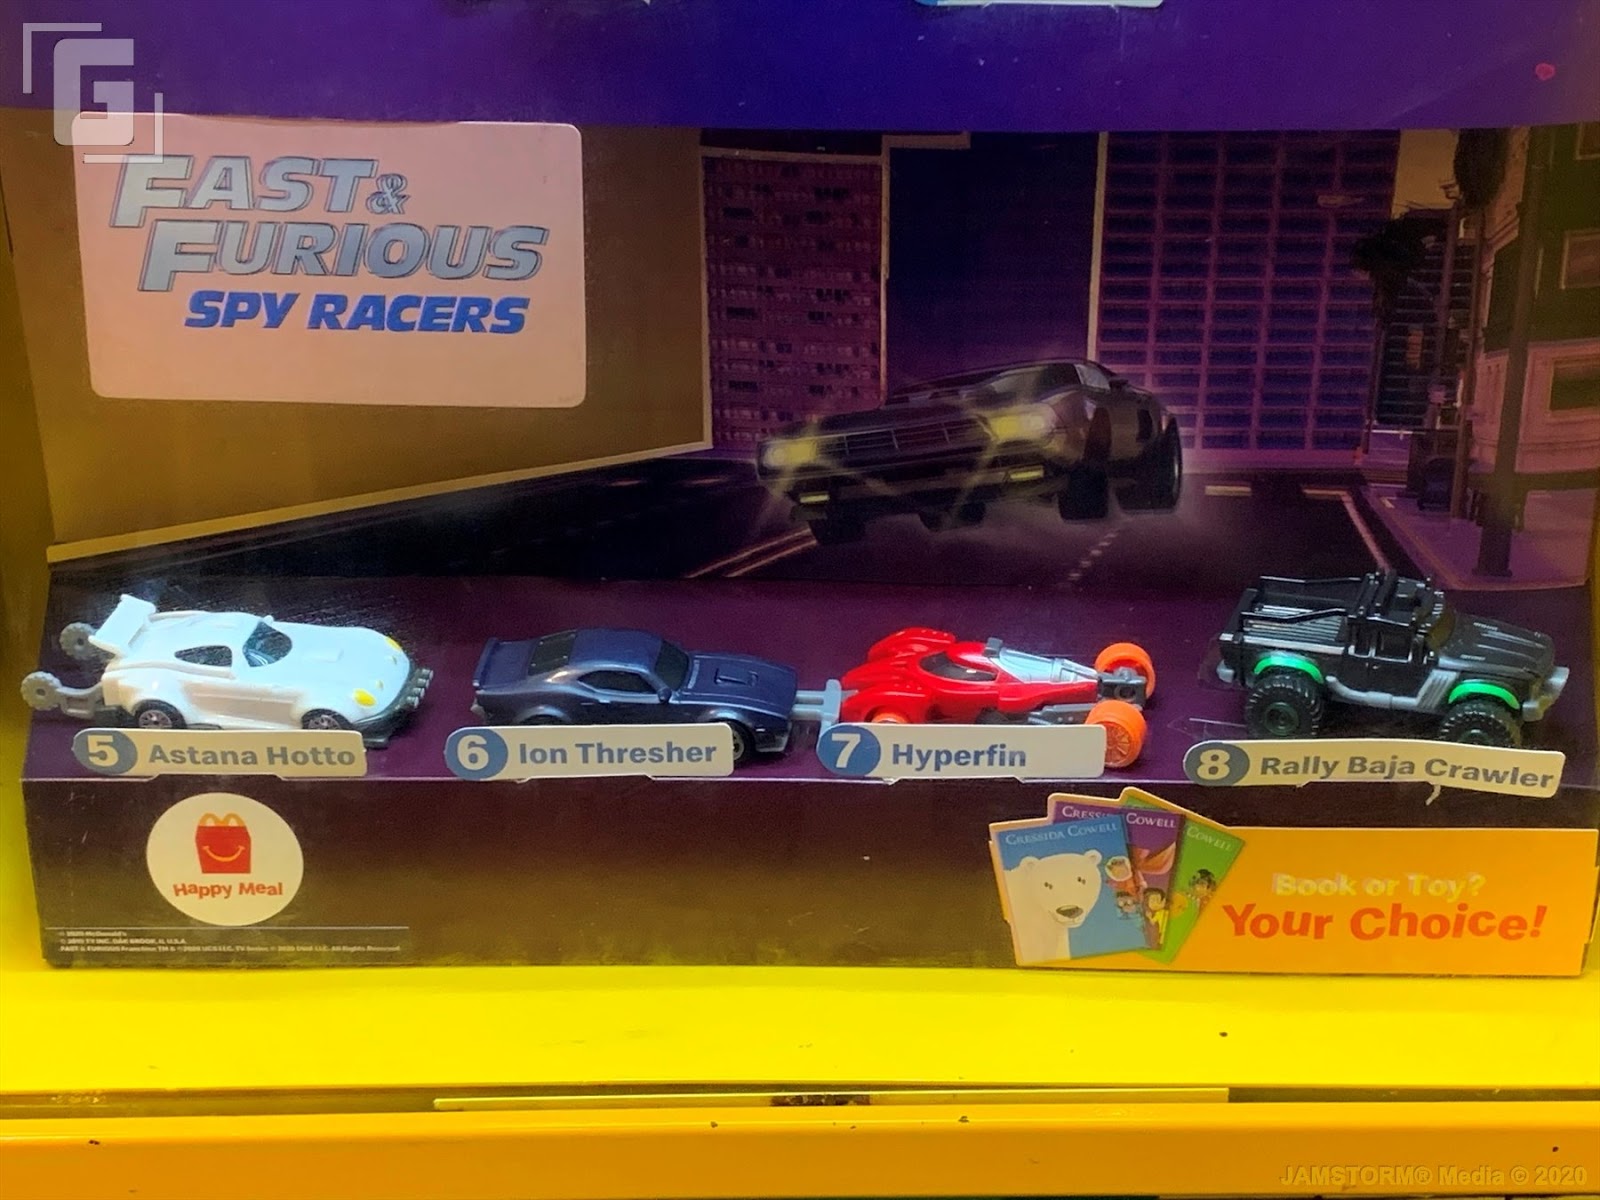 2020 McDONALD'S Dreamworks Spirit Fast and Furious Spy Racers HAPPY MEAL TOYS 